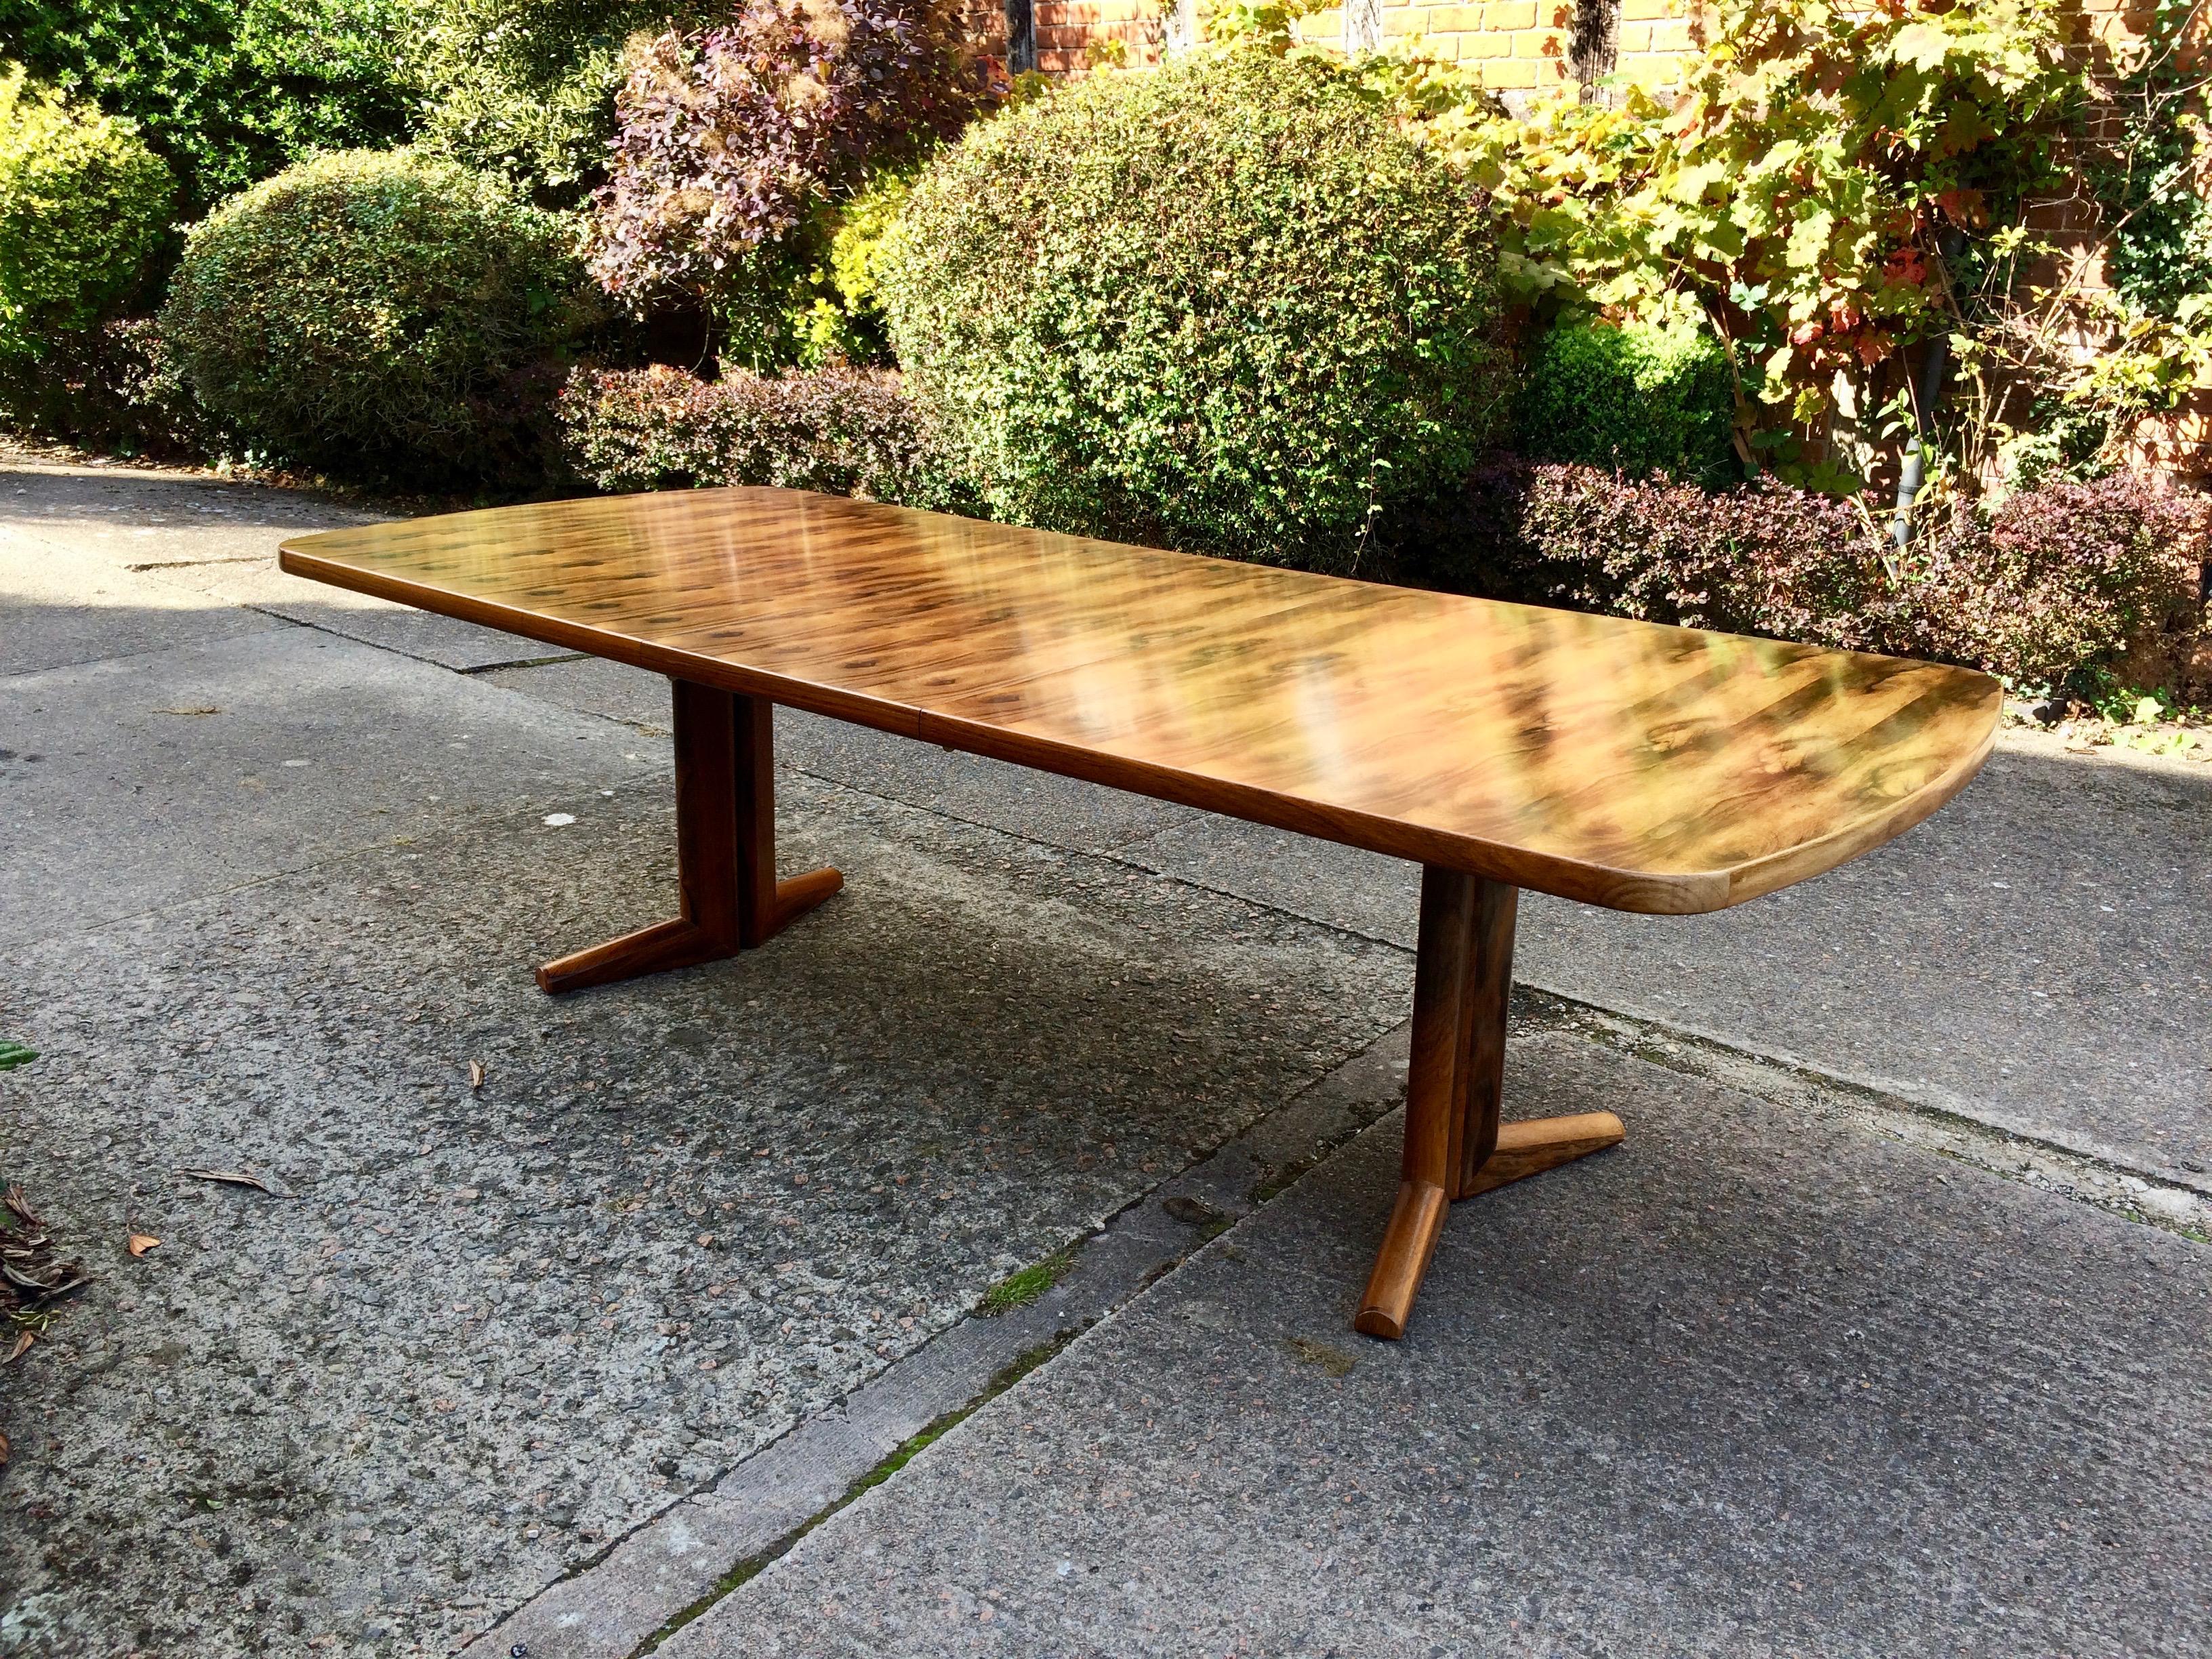 Sublime Gordon Russell 'The Marwood Range' extending dining / boardroom table designed by Martin Hall for Gordon Russell Ltd of Broadway, Material: Figured Rosewood - Date: 1970s. One previous owner from new and is offered in superb original